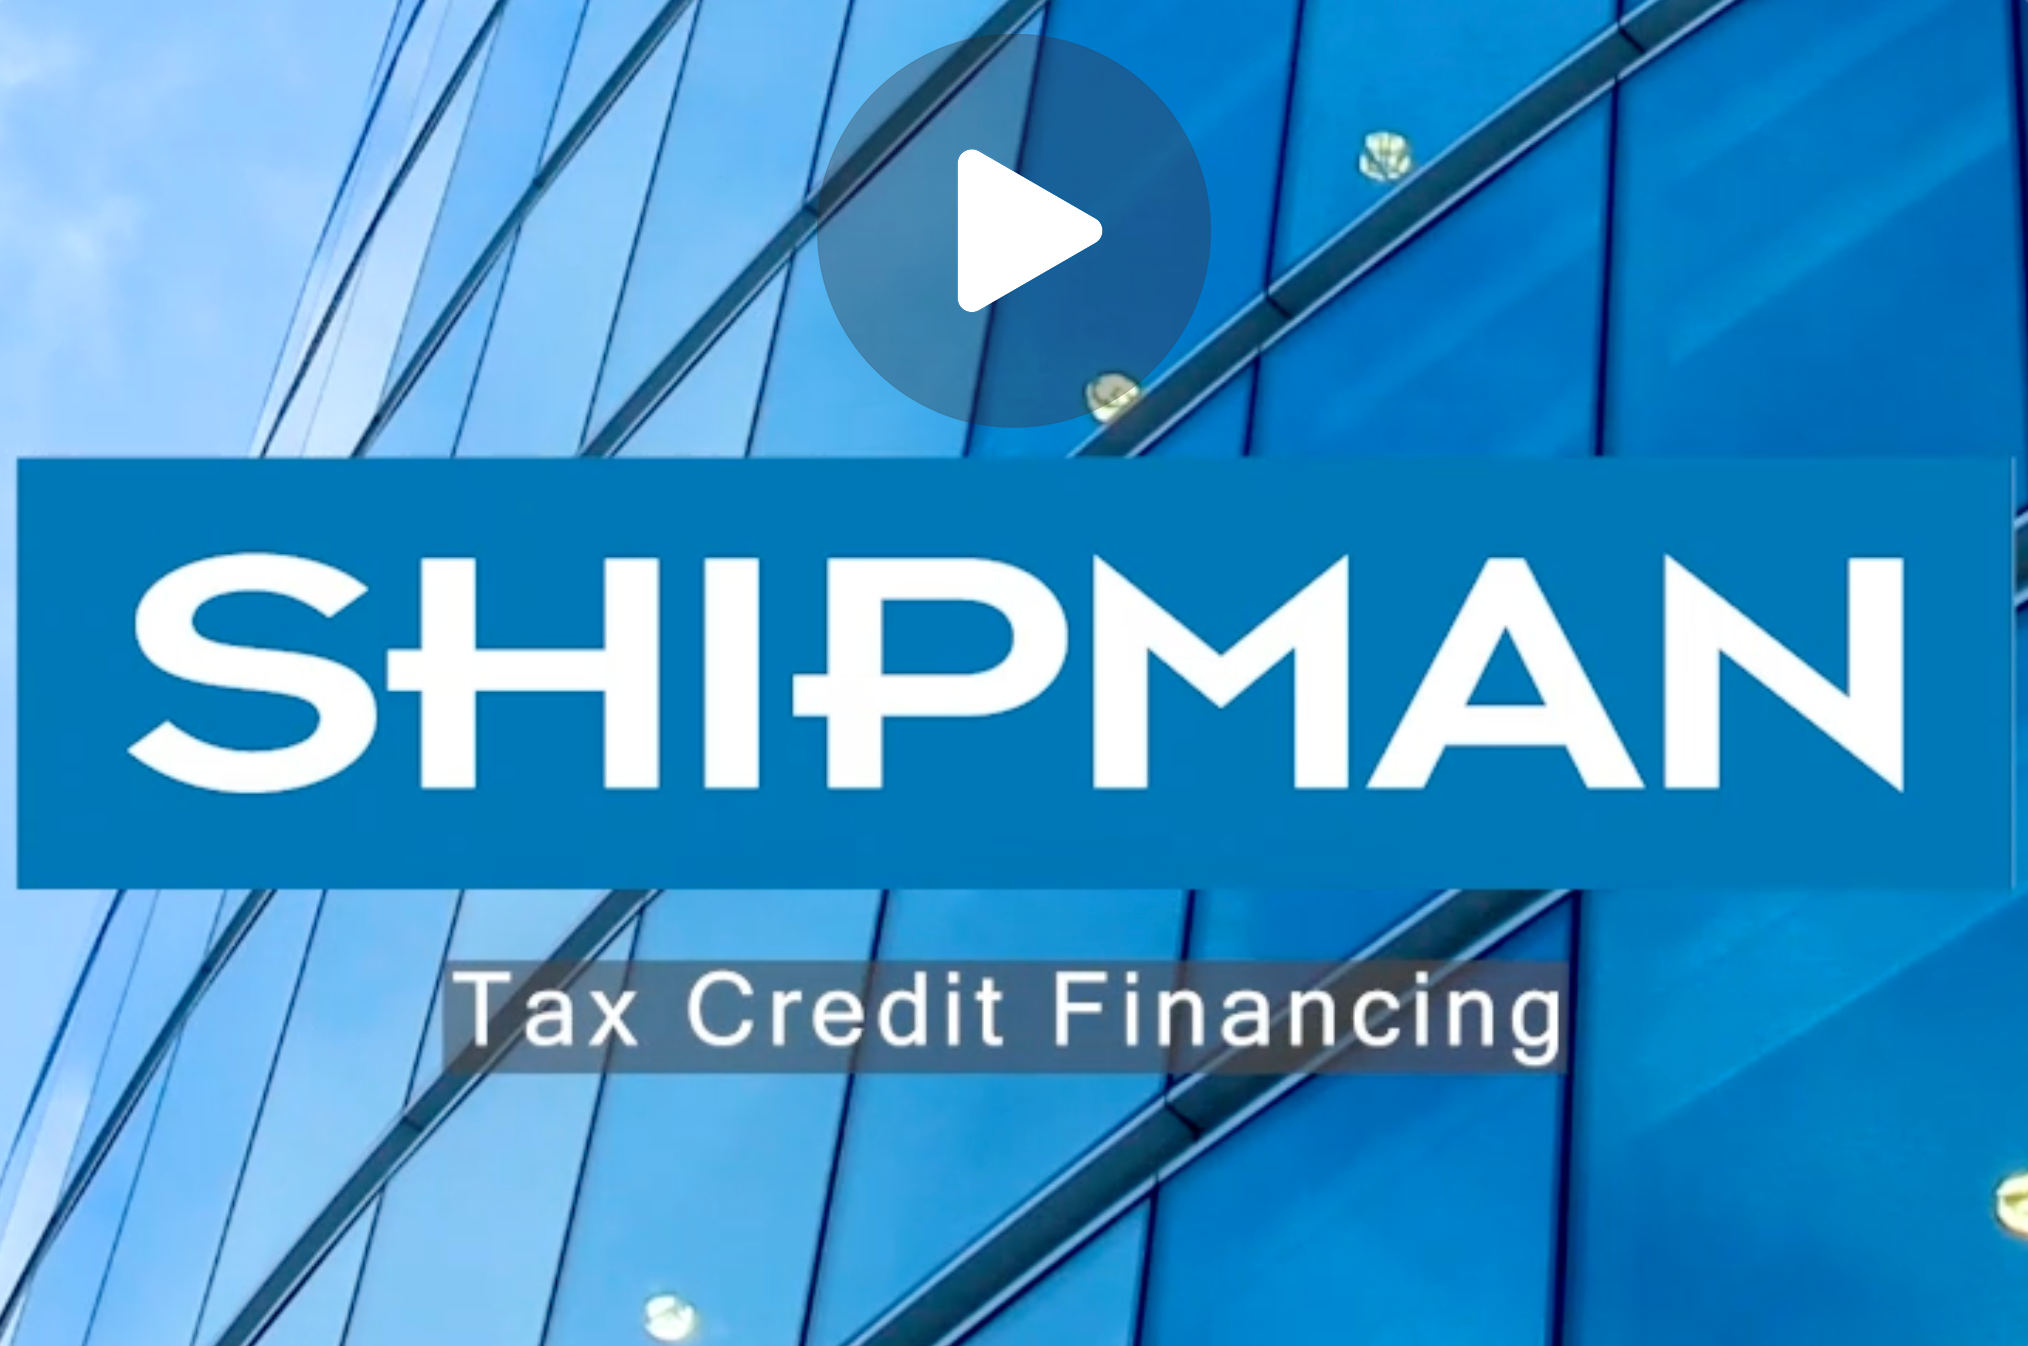 play tax credit financing informational video